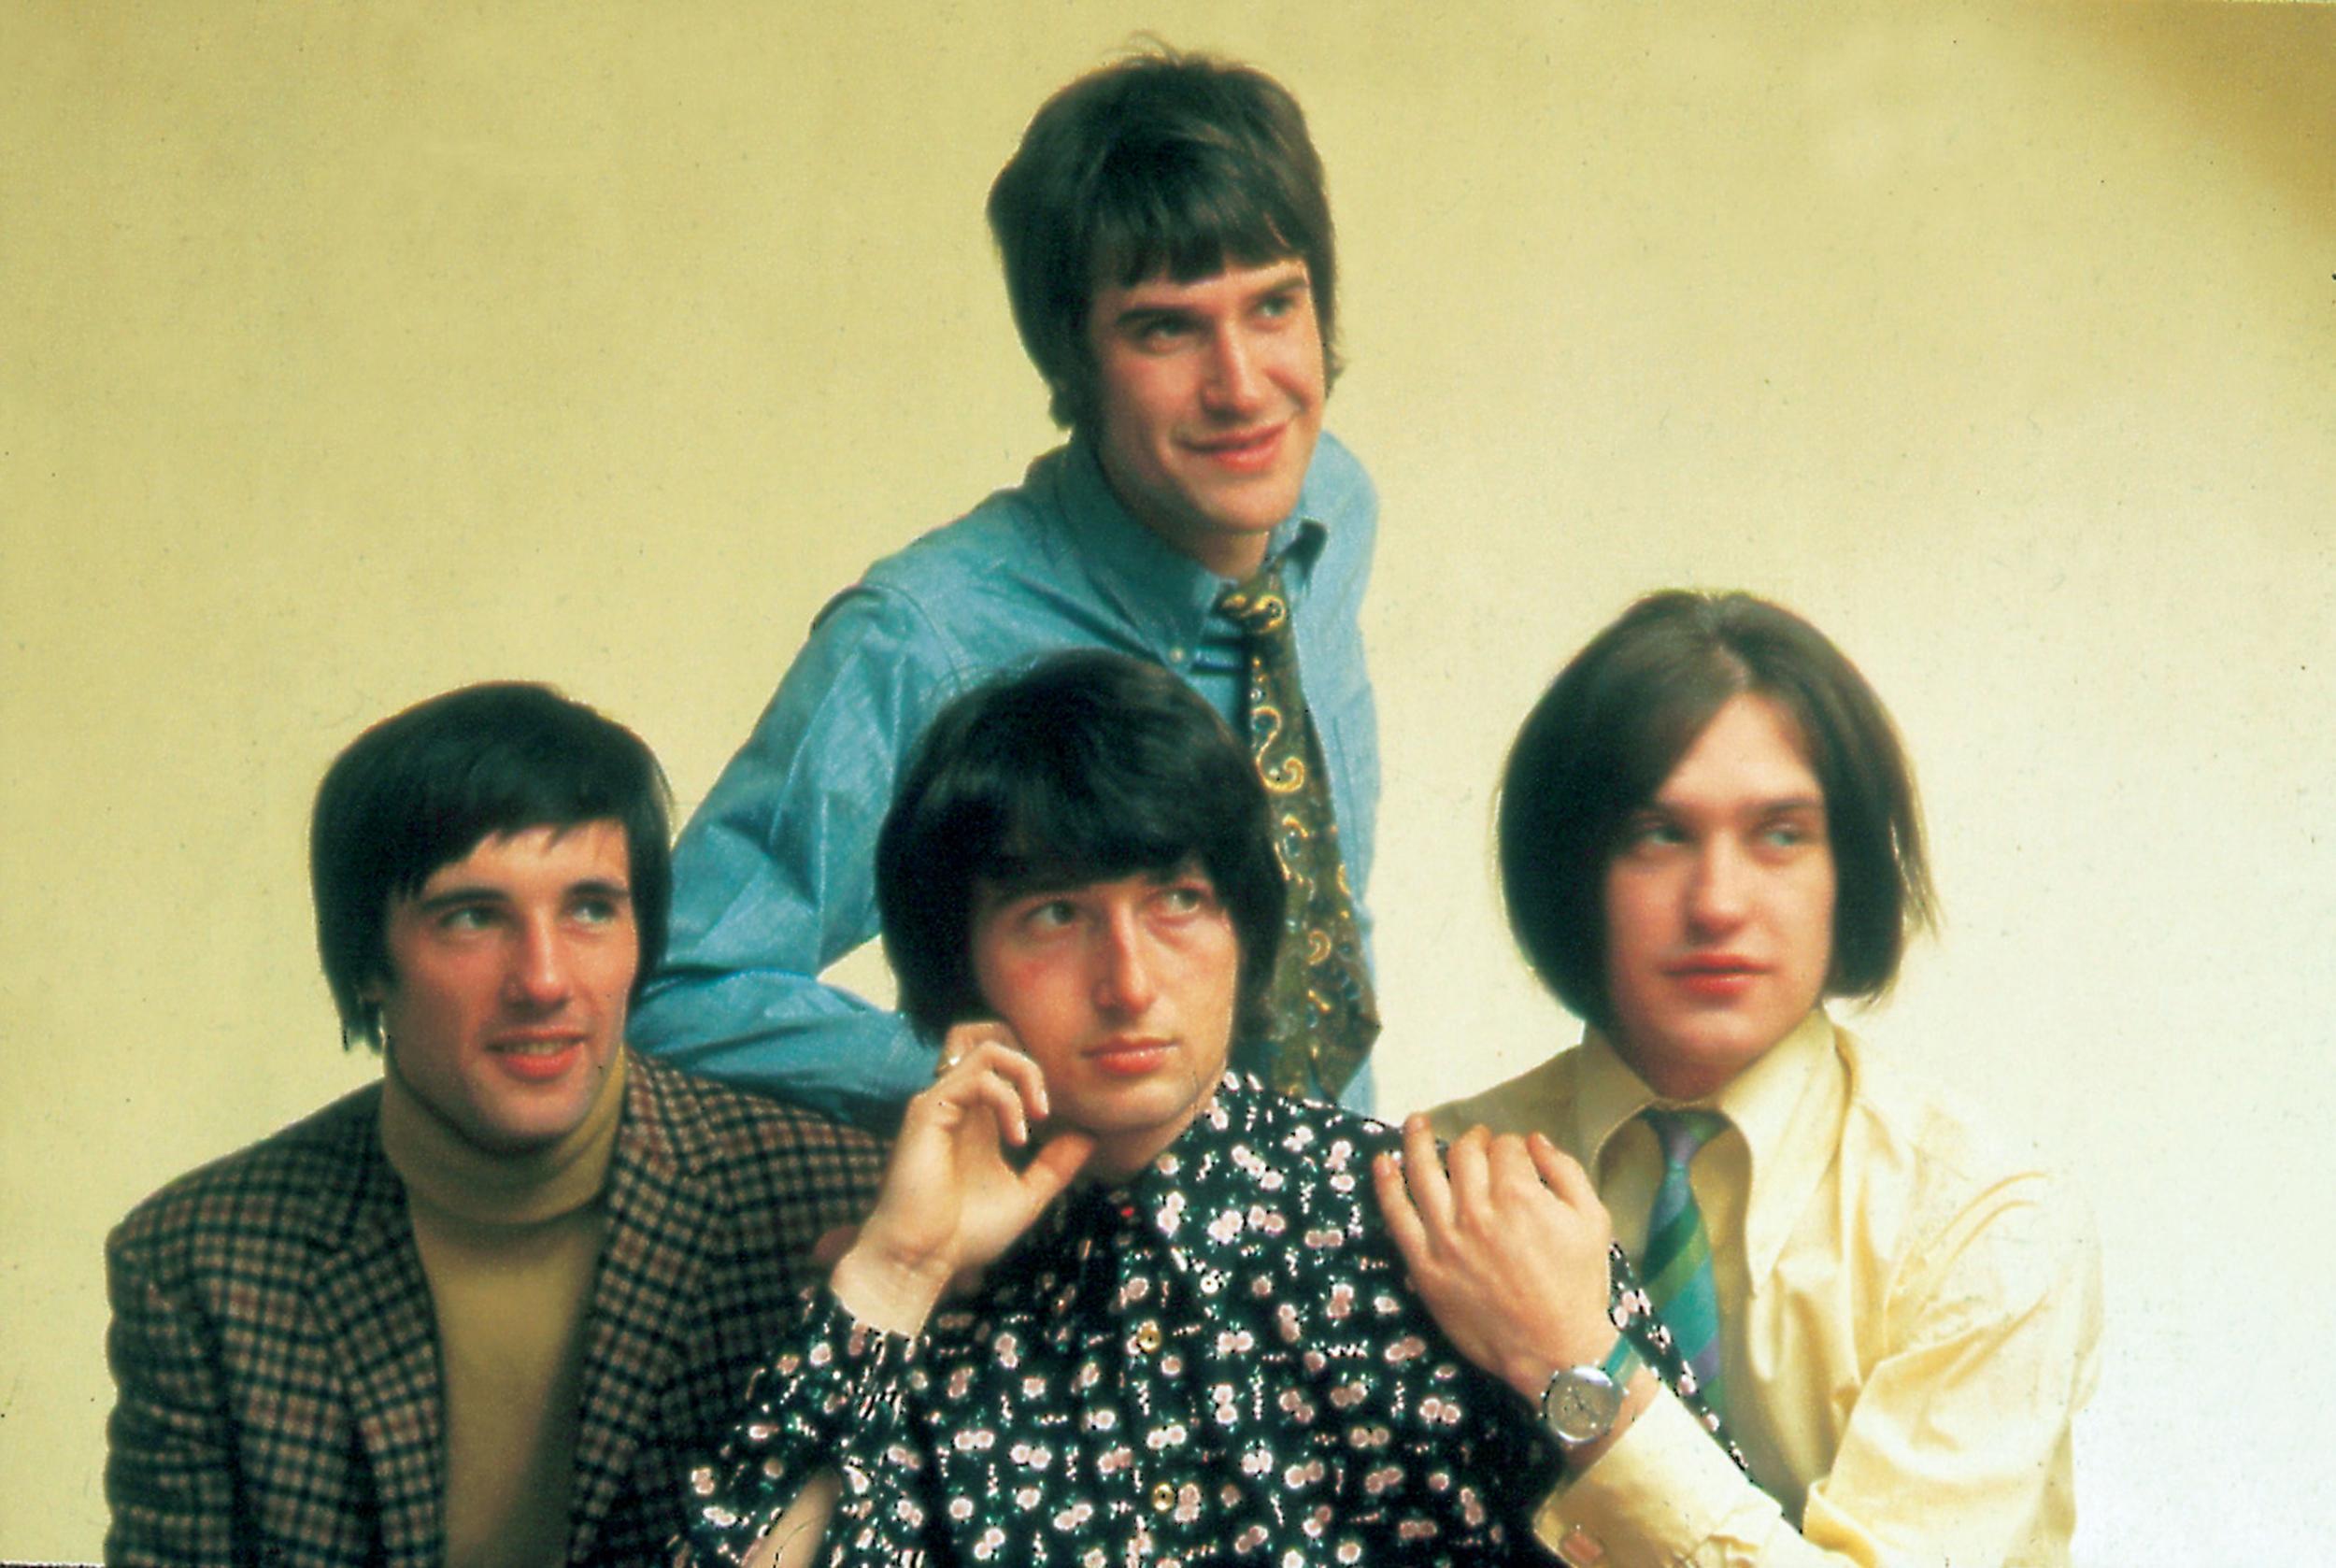 Not like anybody else: The Kinks in 1968 (Dave Davies on the right)